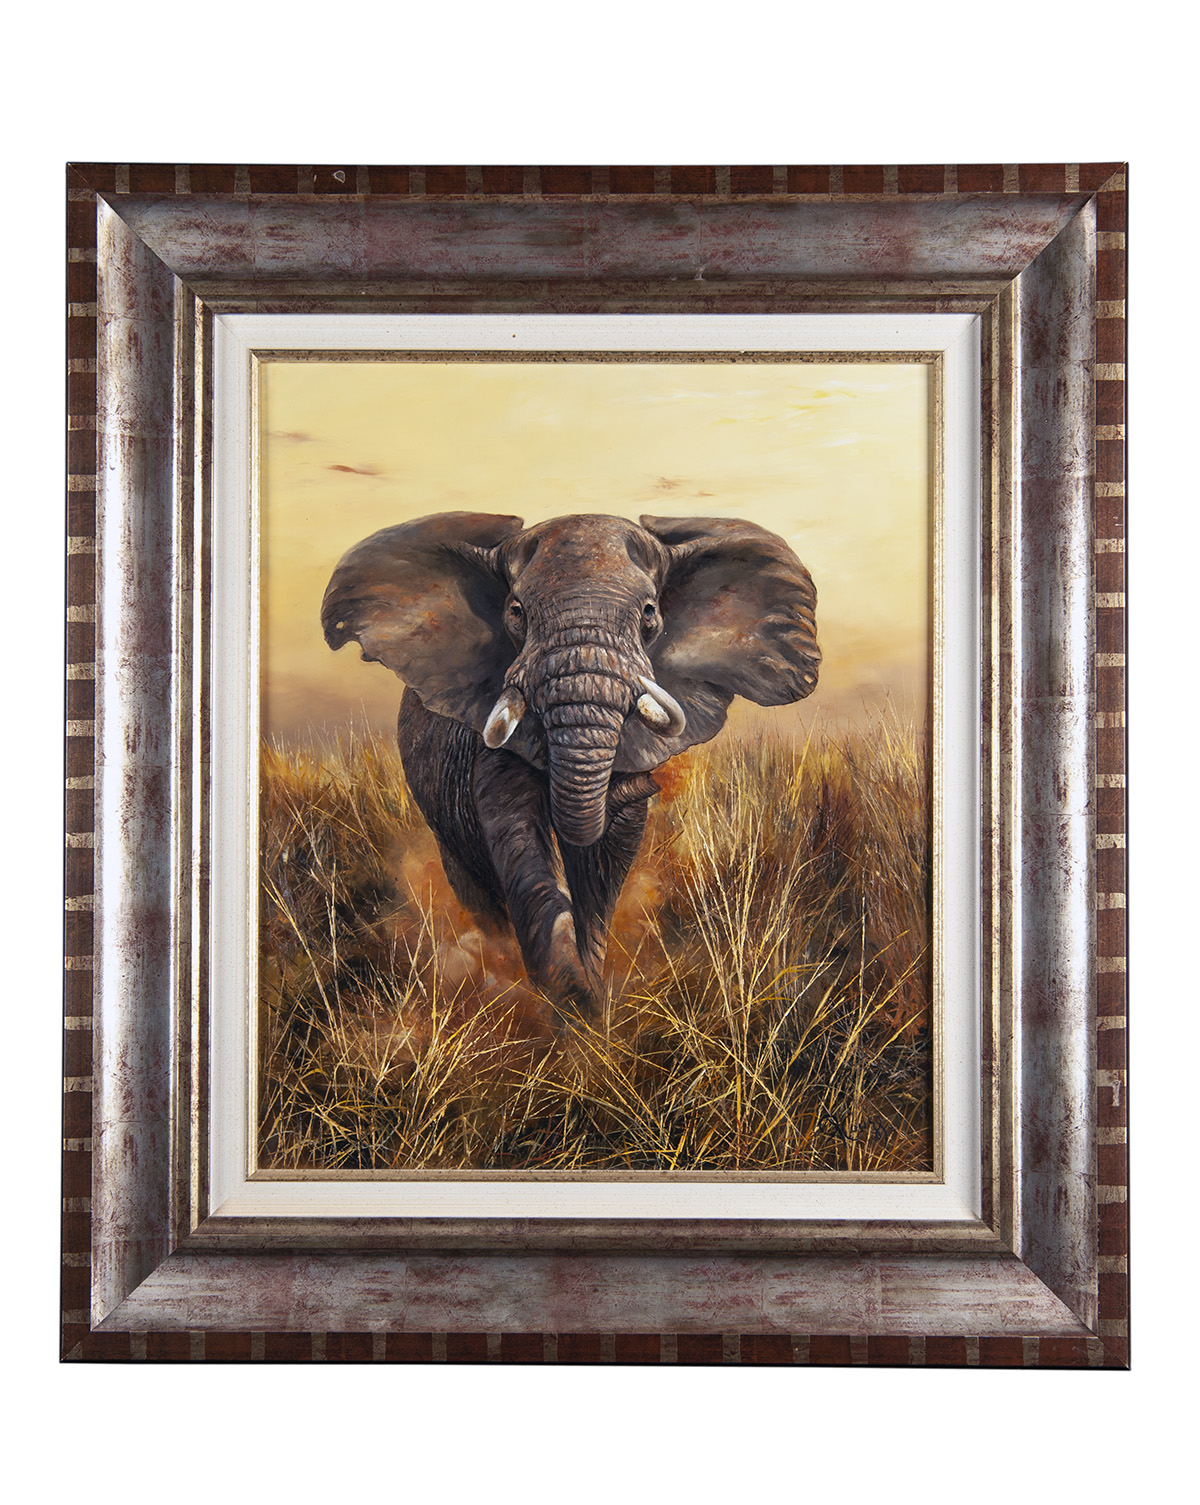 PIERRE COUZY AN ORIGINAL OIL ON CANVAS OF A CHARGING BULL ELEPHANT, signed by the artist, set in a